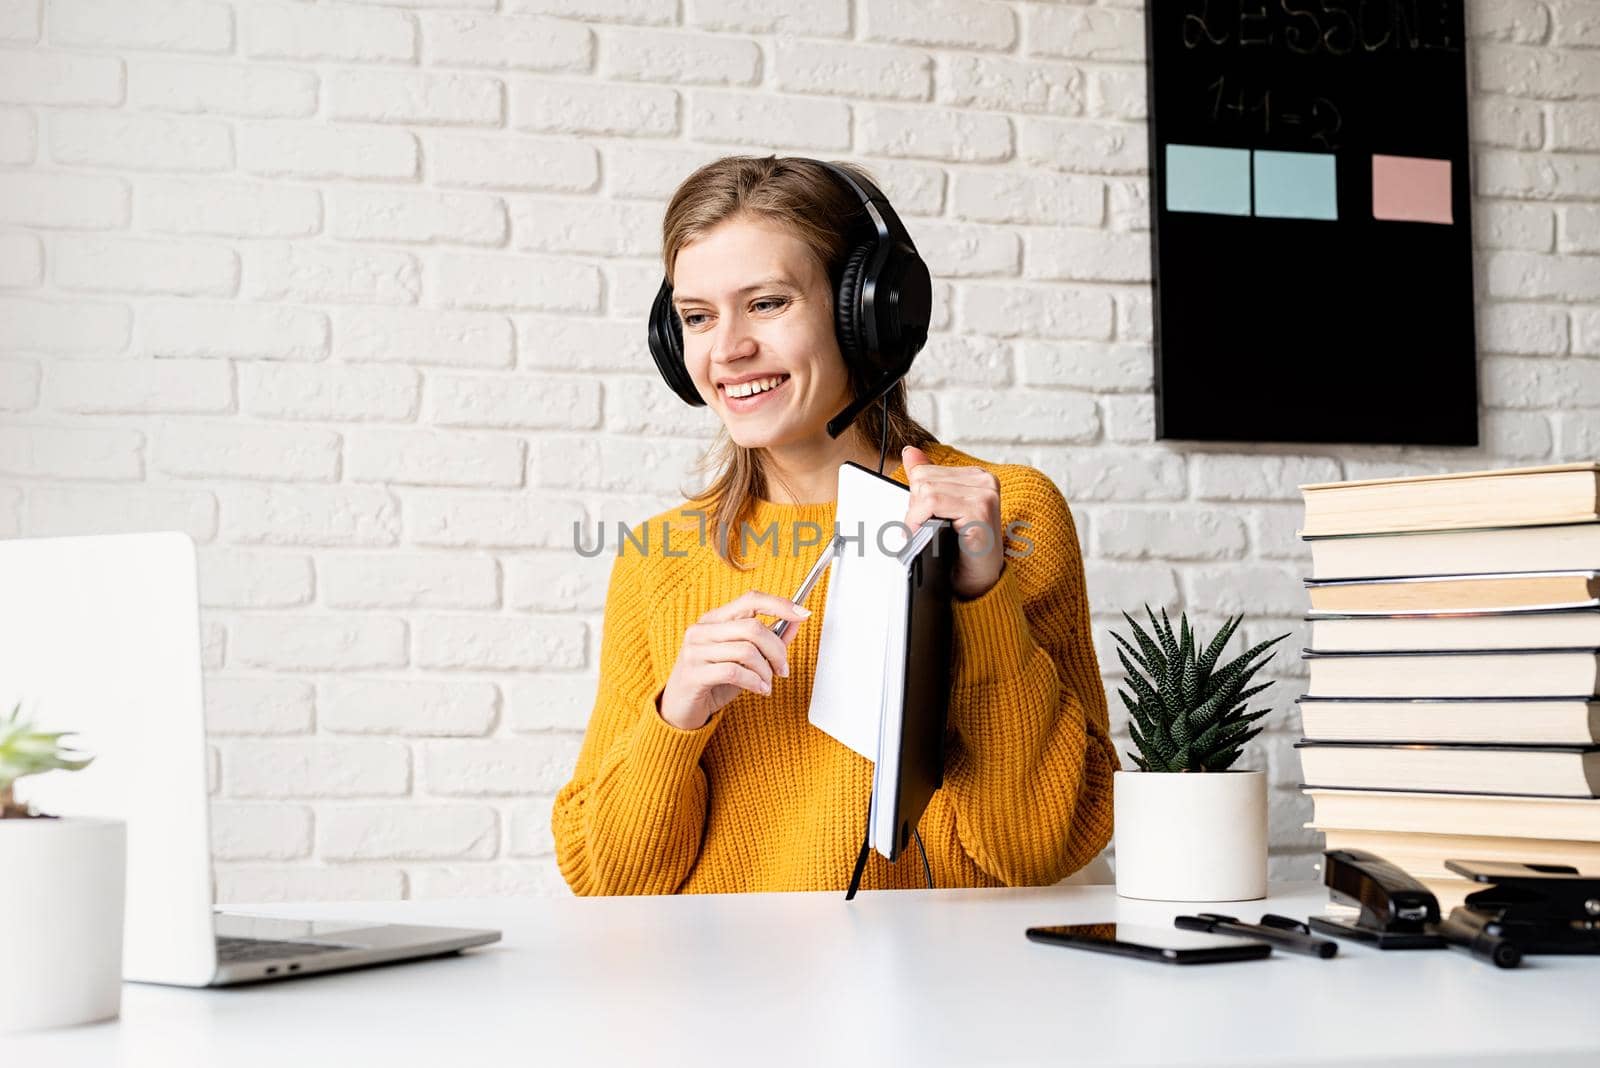 Distance learning. E-learning. Young smiling woman in yellow sweater and black headphones studying online using laptop writing in notebook